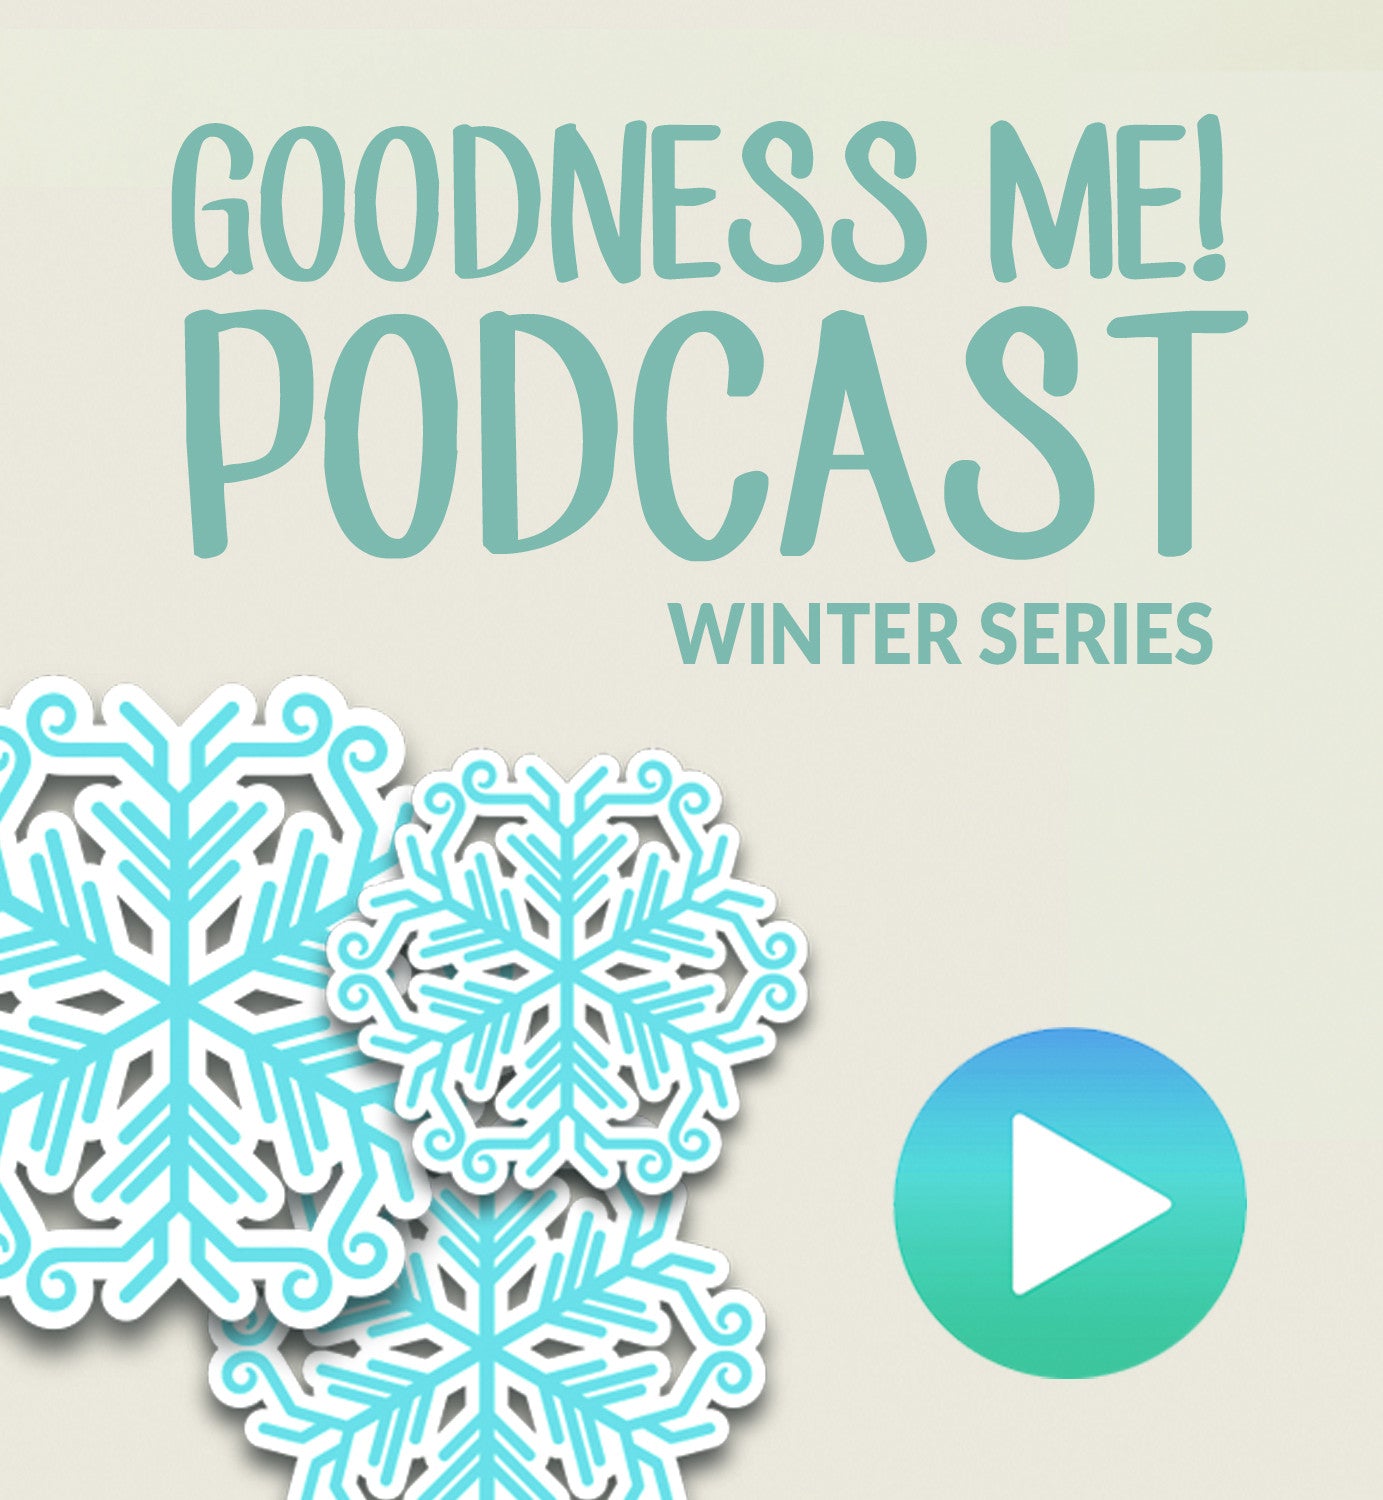 Jan 21 Goodness Me! Podcast - Part 1: What Makes a Good Probiotic?